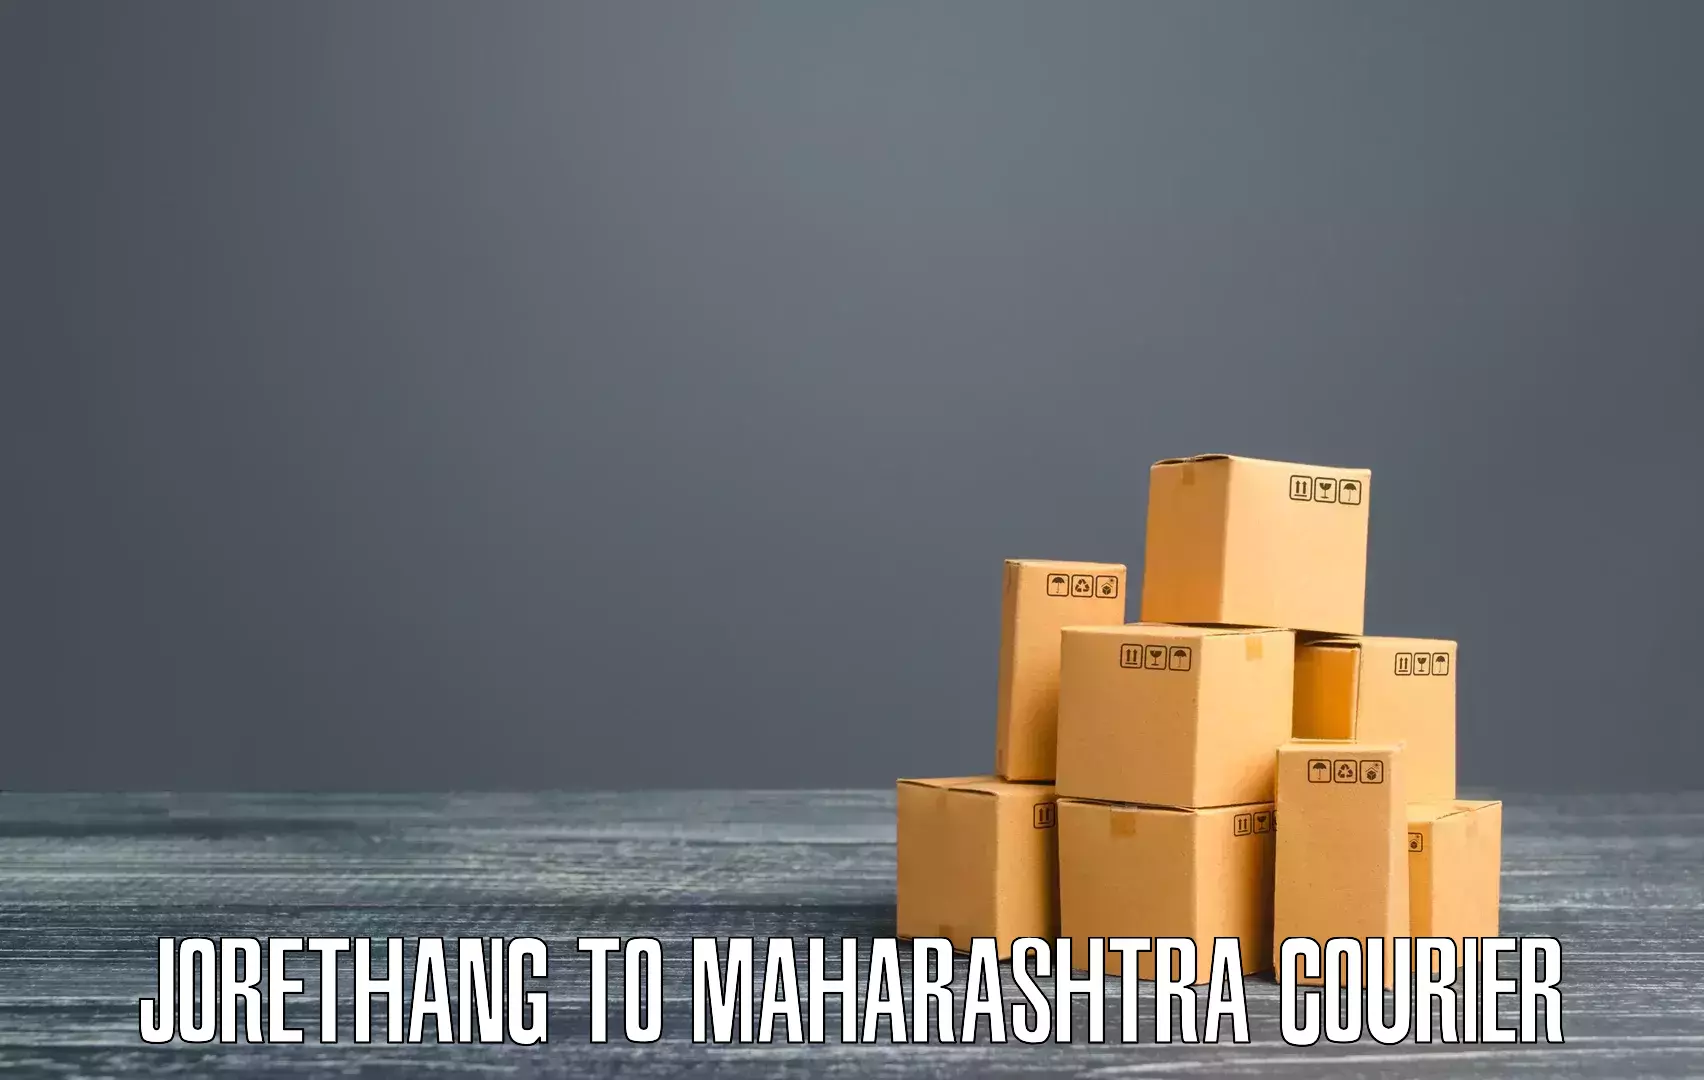 Customer-friendly courier services Jorethang to Mumbai Port